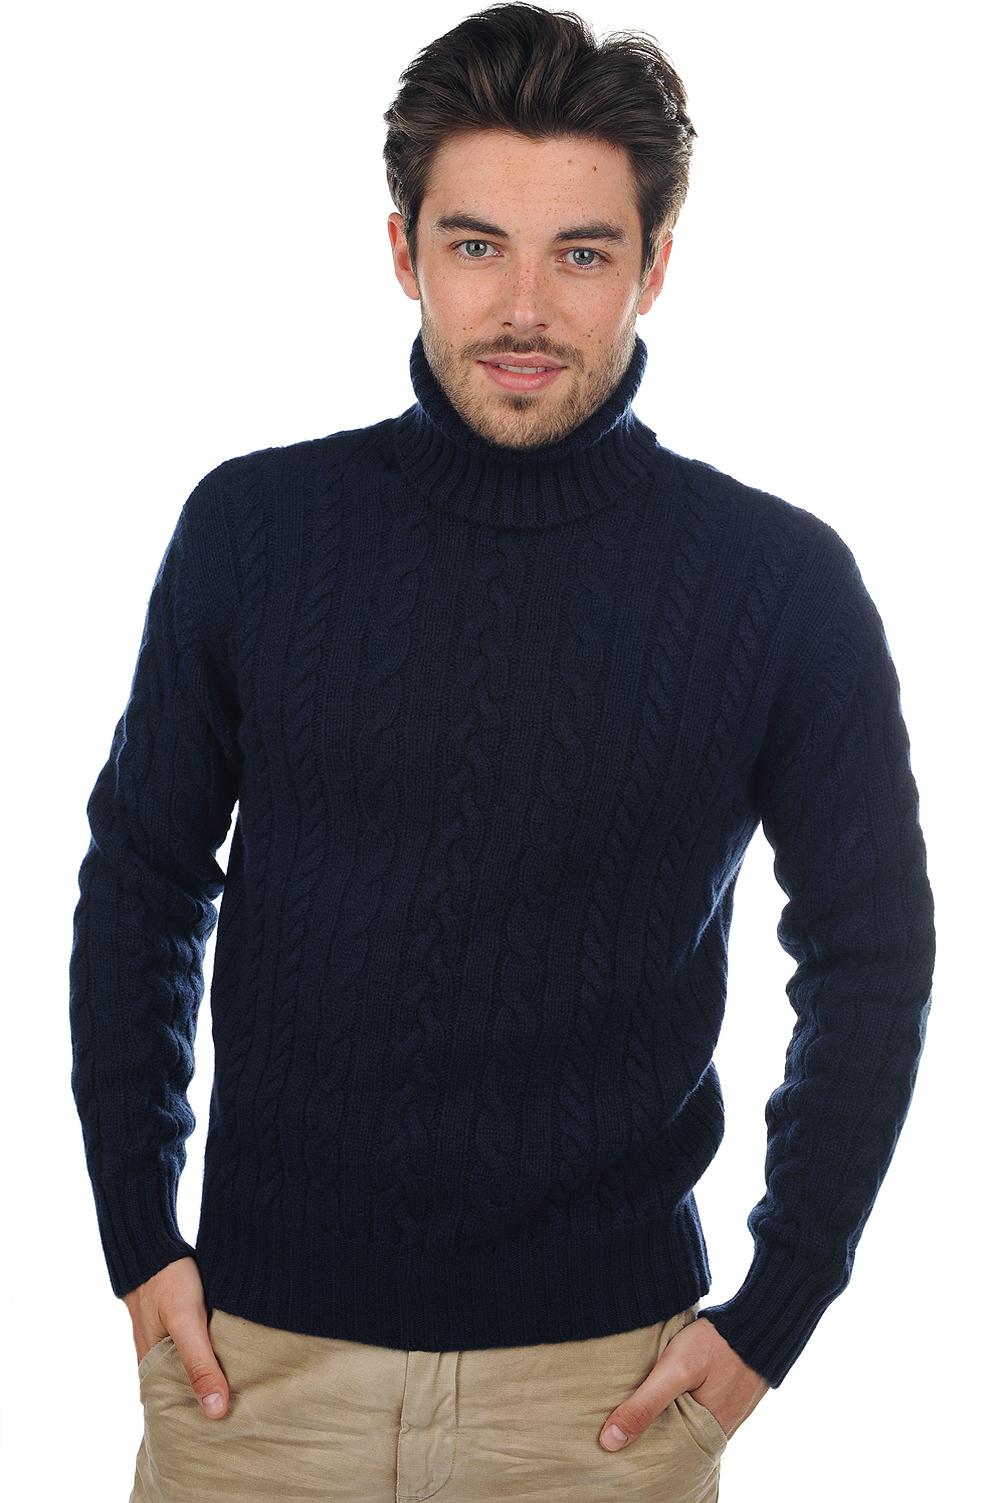 Cachemire pull homme lucas marine fonce 3xl